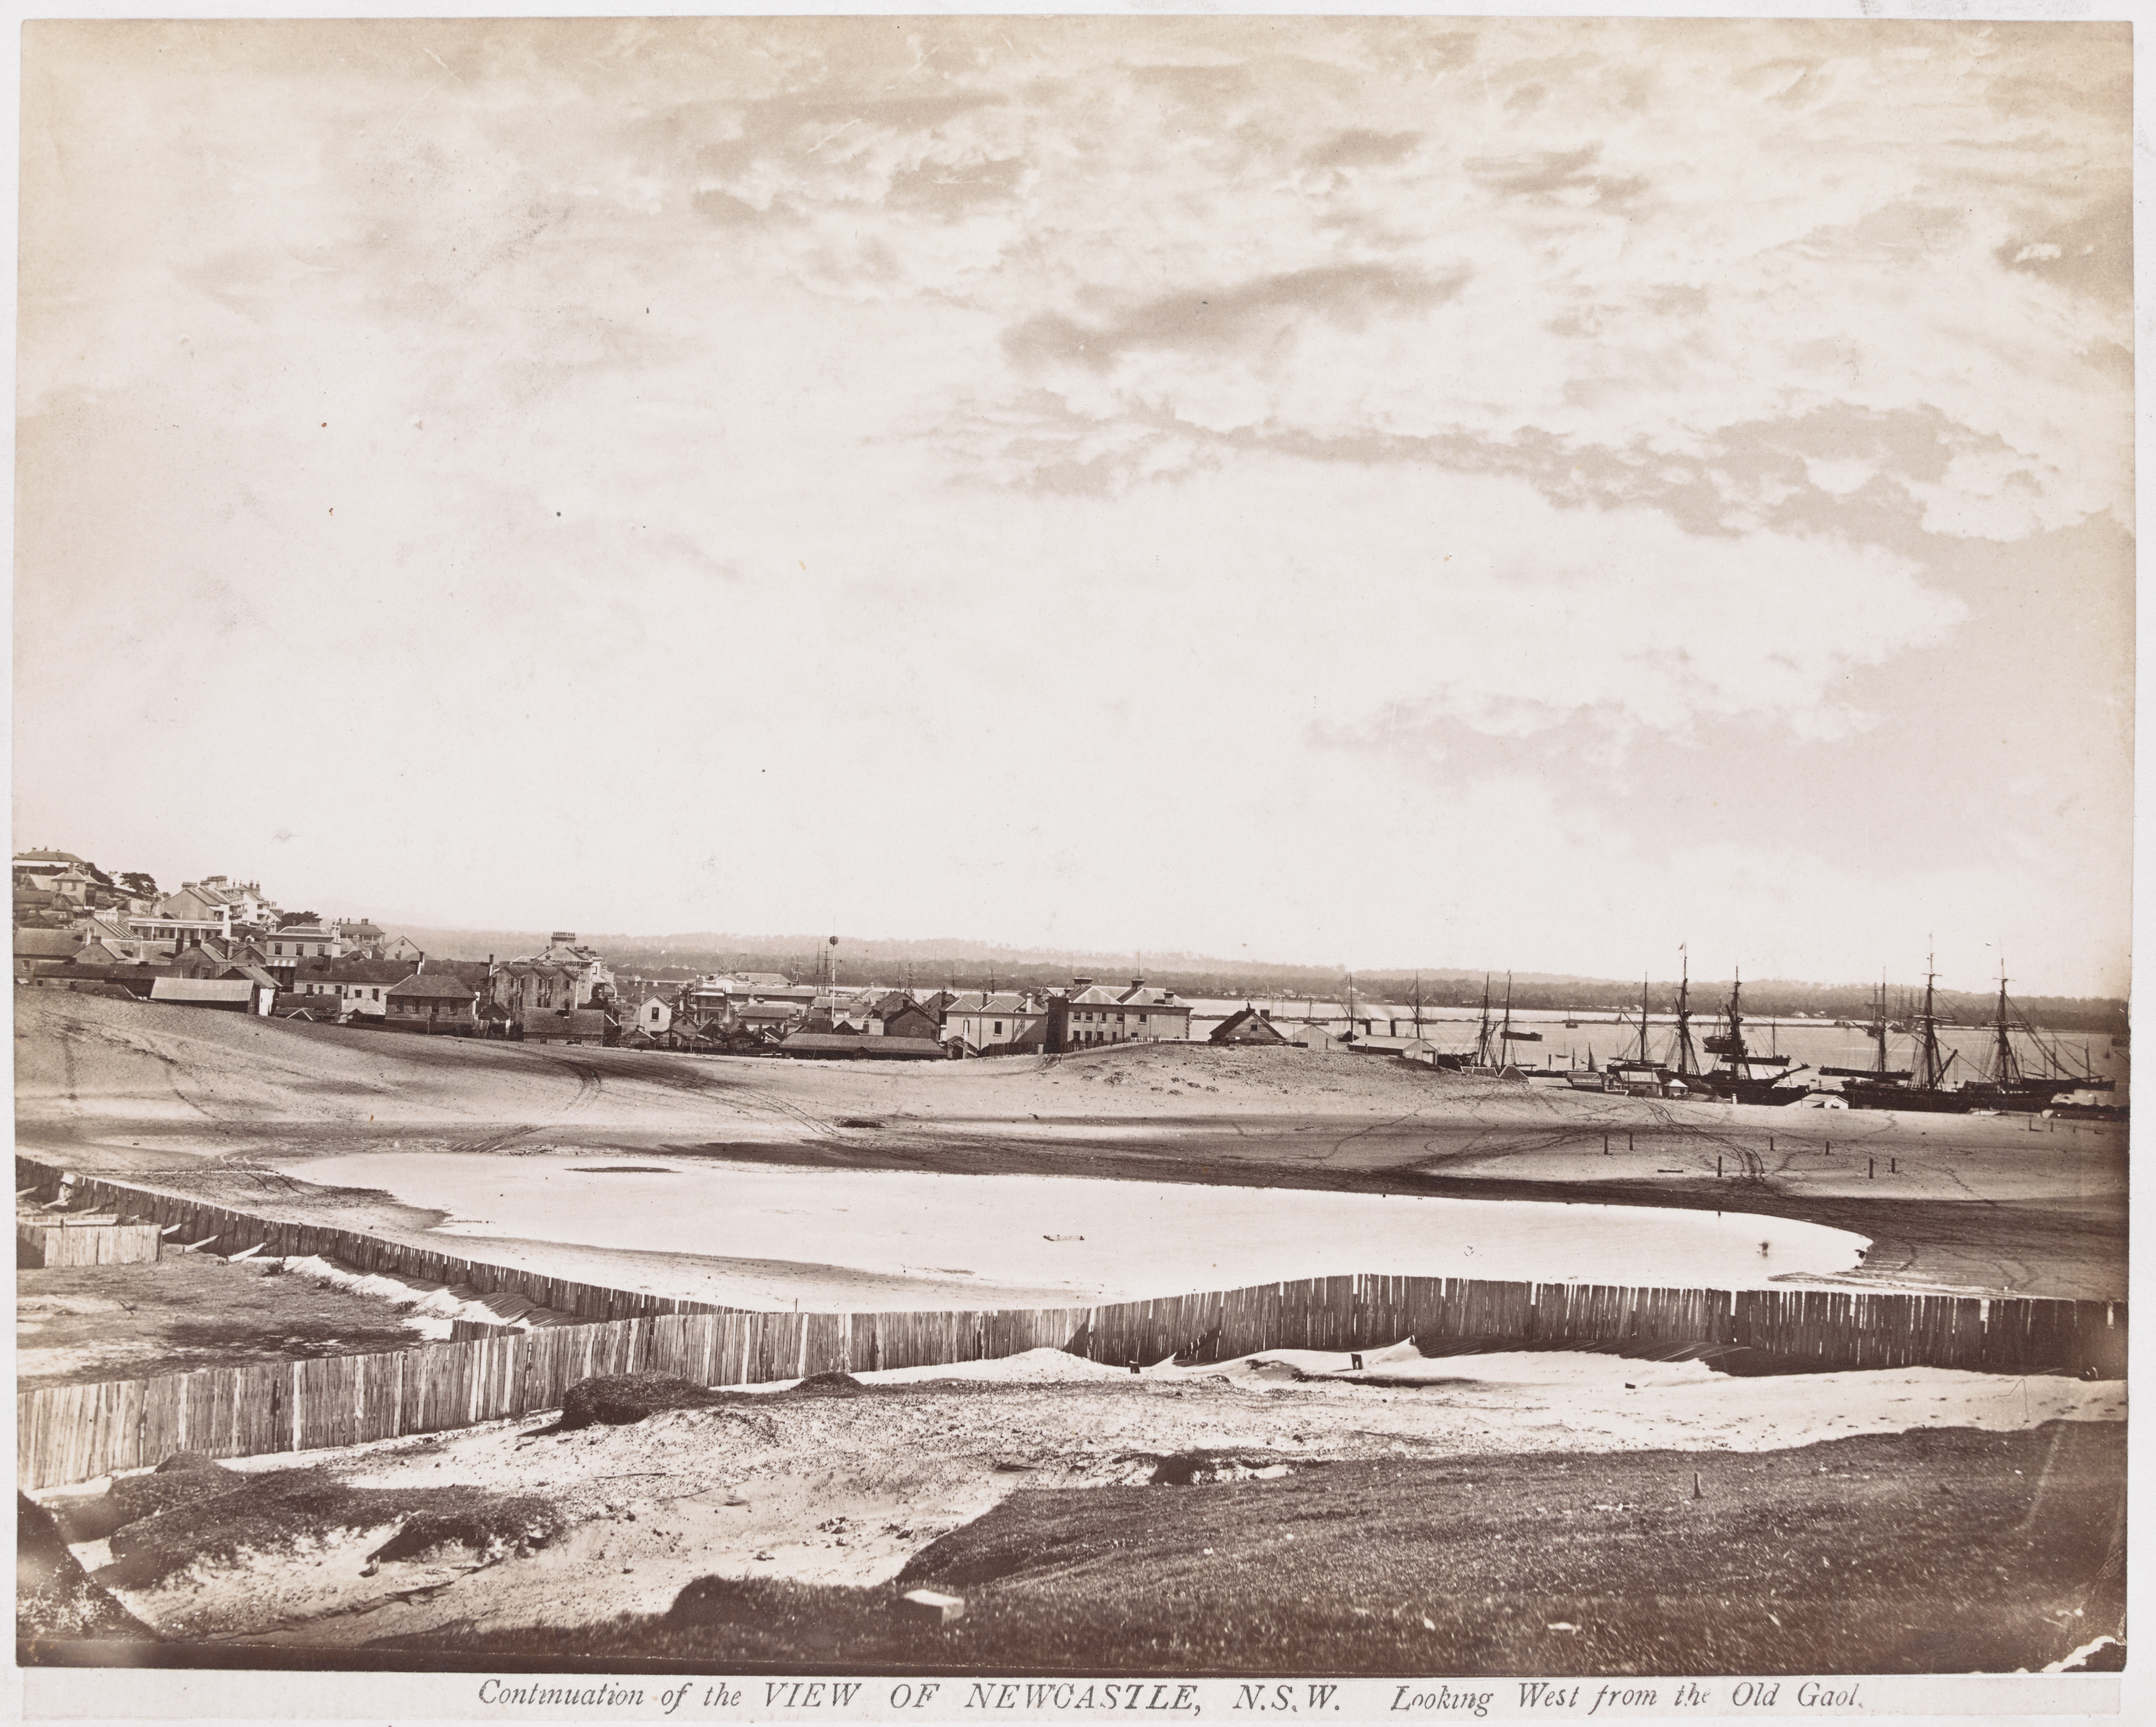 Continuation of View of Newcastle Looking West from the Old Gaol (H141653 - Courtesy of the State Library of Victoria)